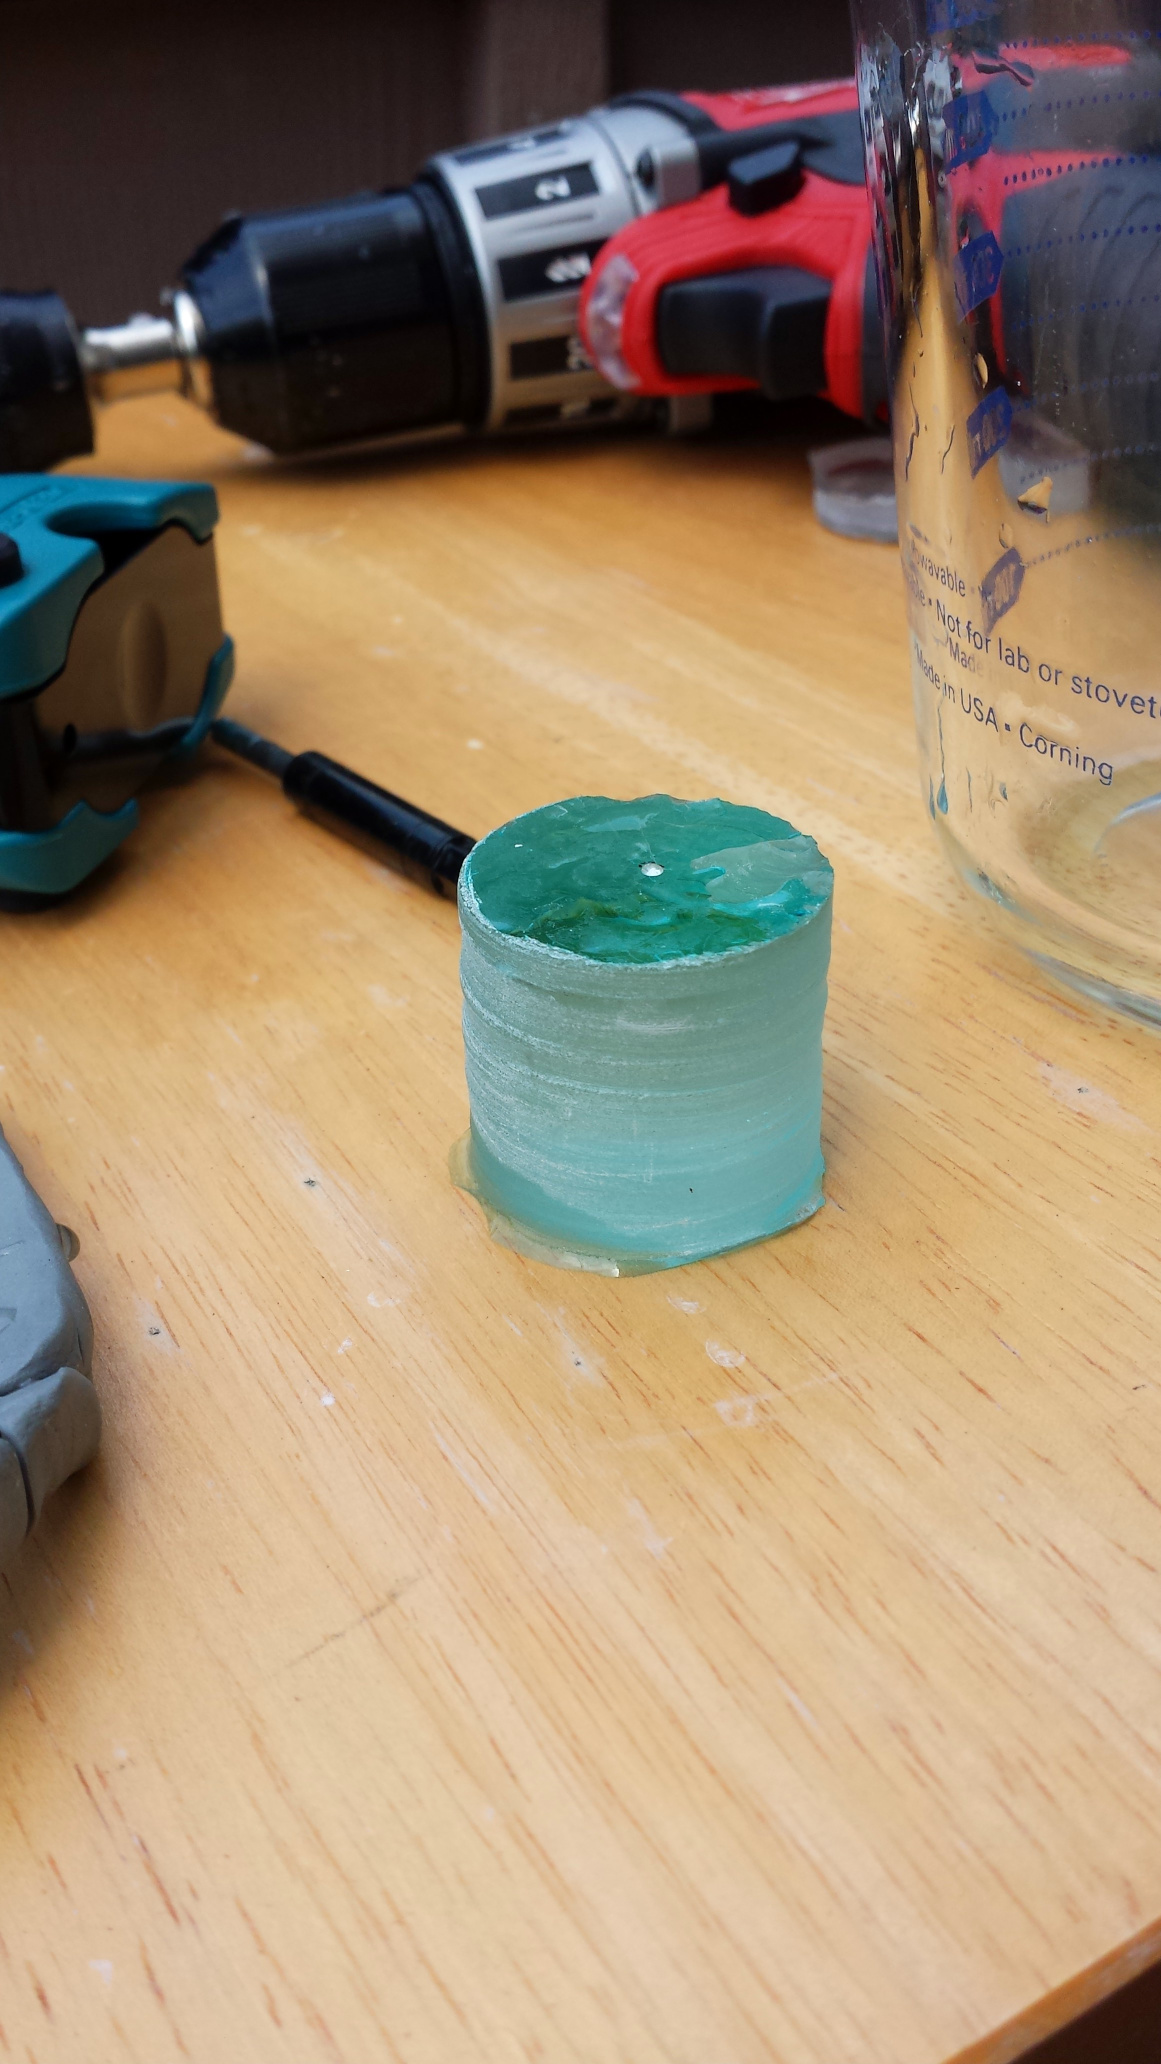 a thick, 1.5 inch tall plug of green glass.